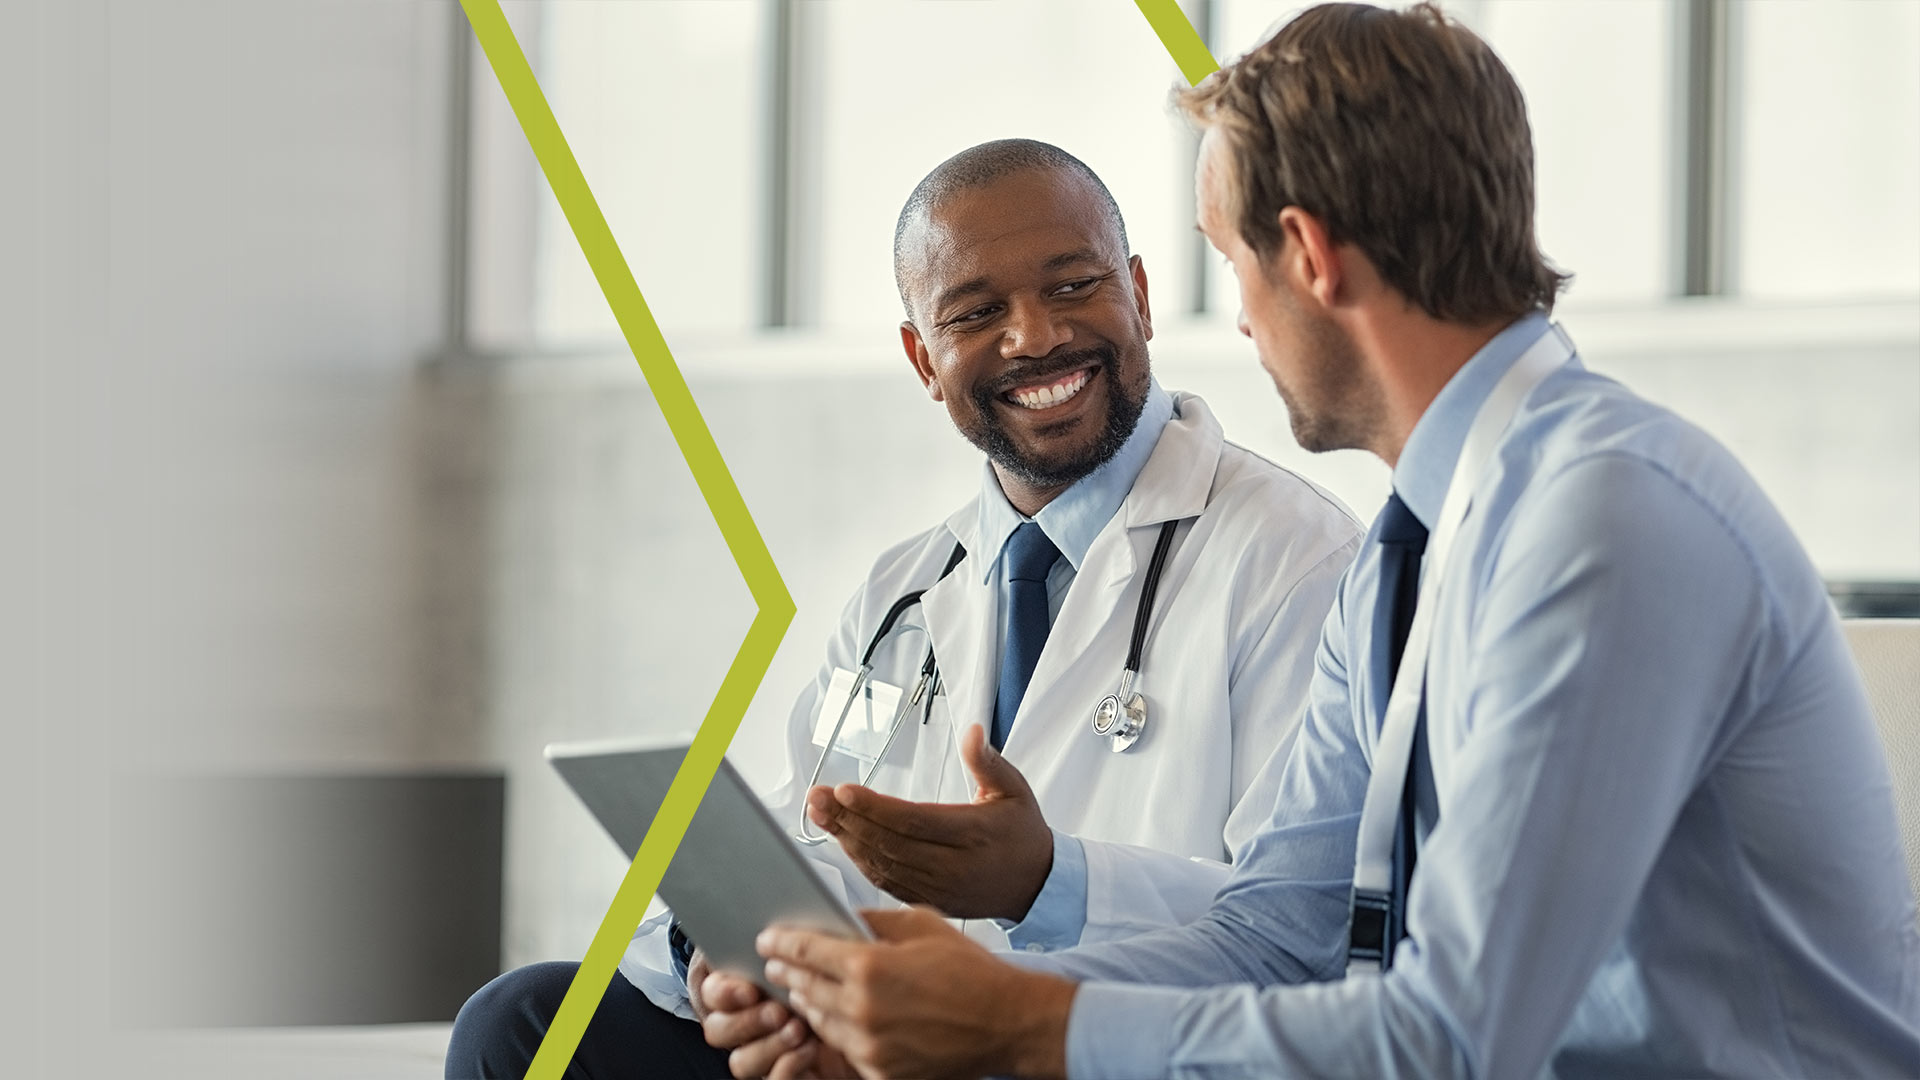 SCP Health - Streamline processes while aligning departments through our Clinical Integration, Clinical Management, and integrated medicine solutions.